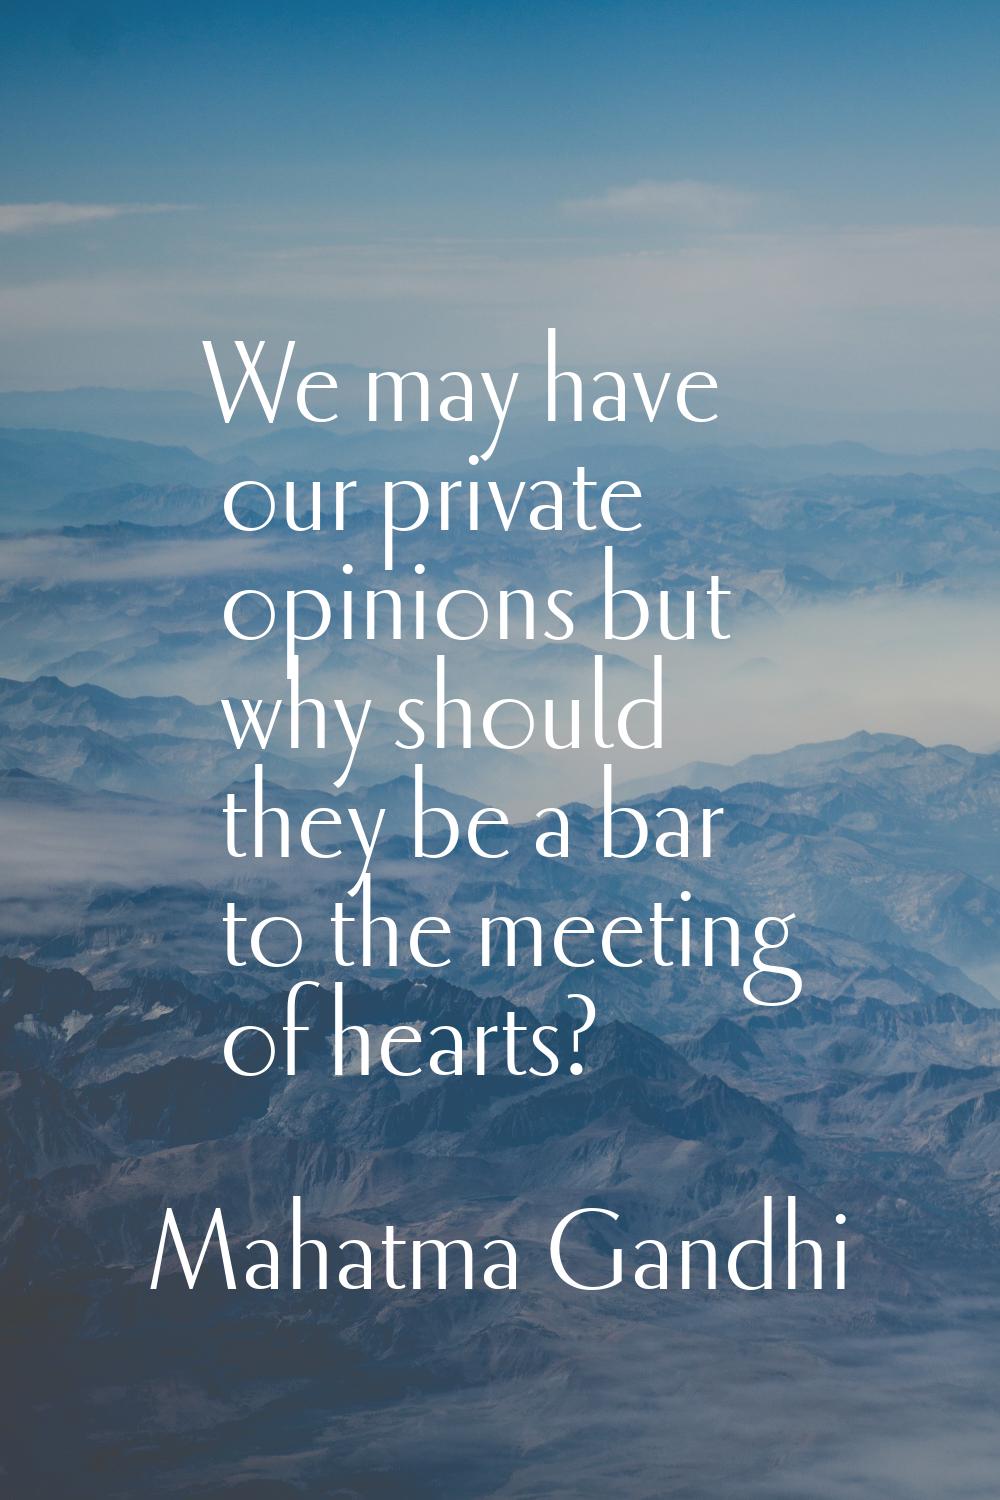 We may have our private opinions but why should they be a bar to the meeting of hearts?